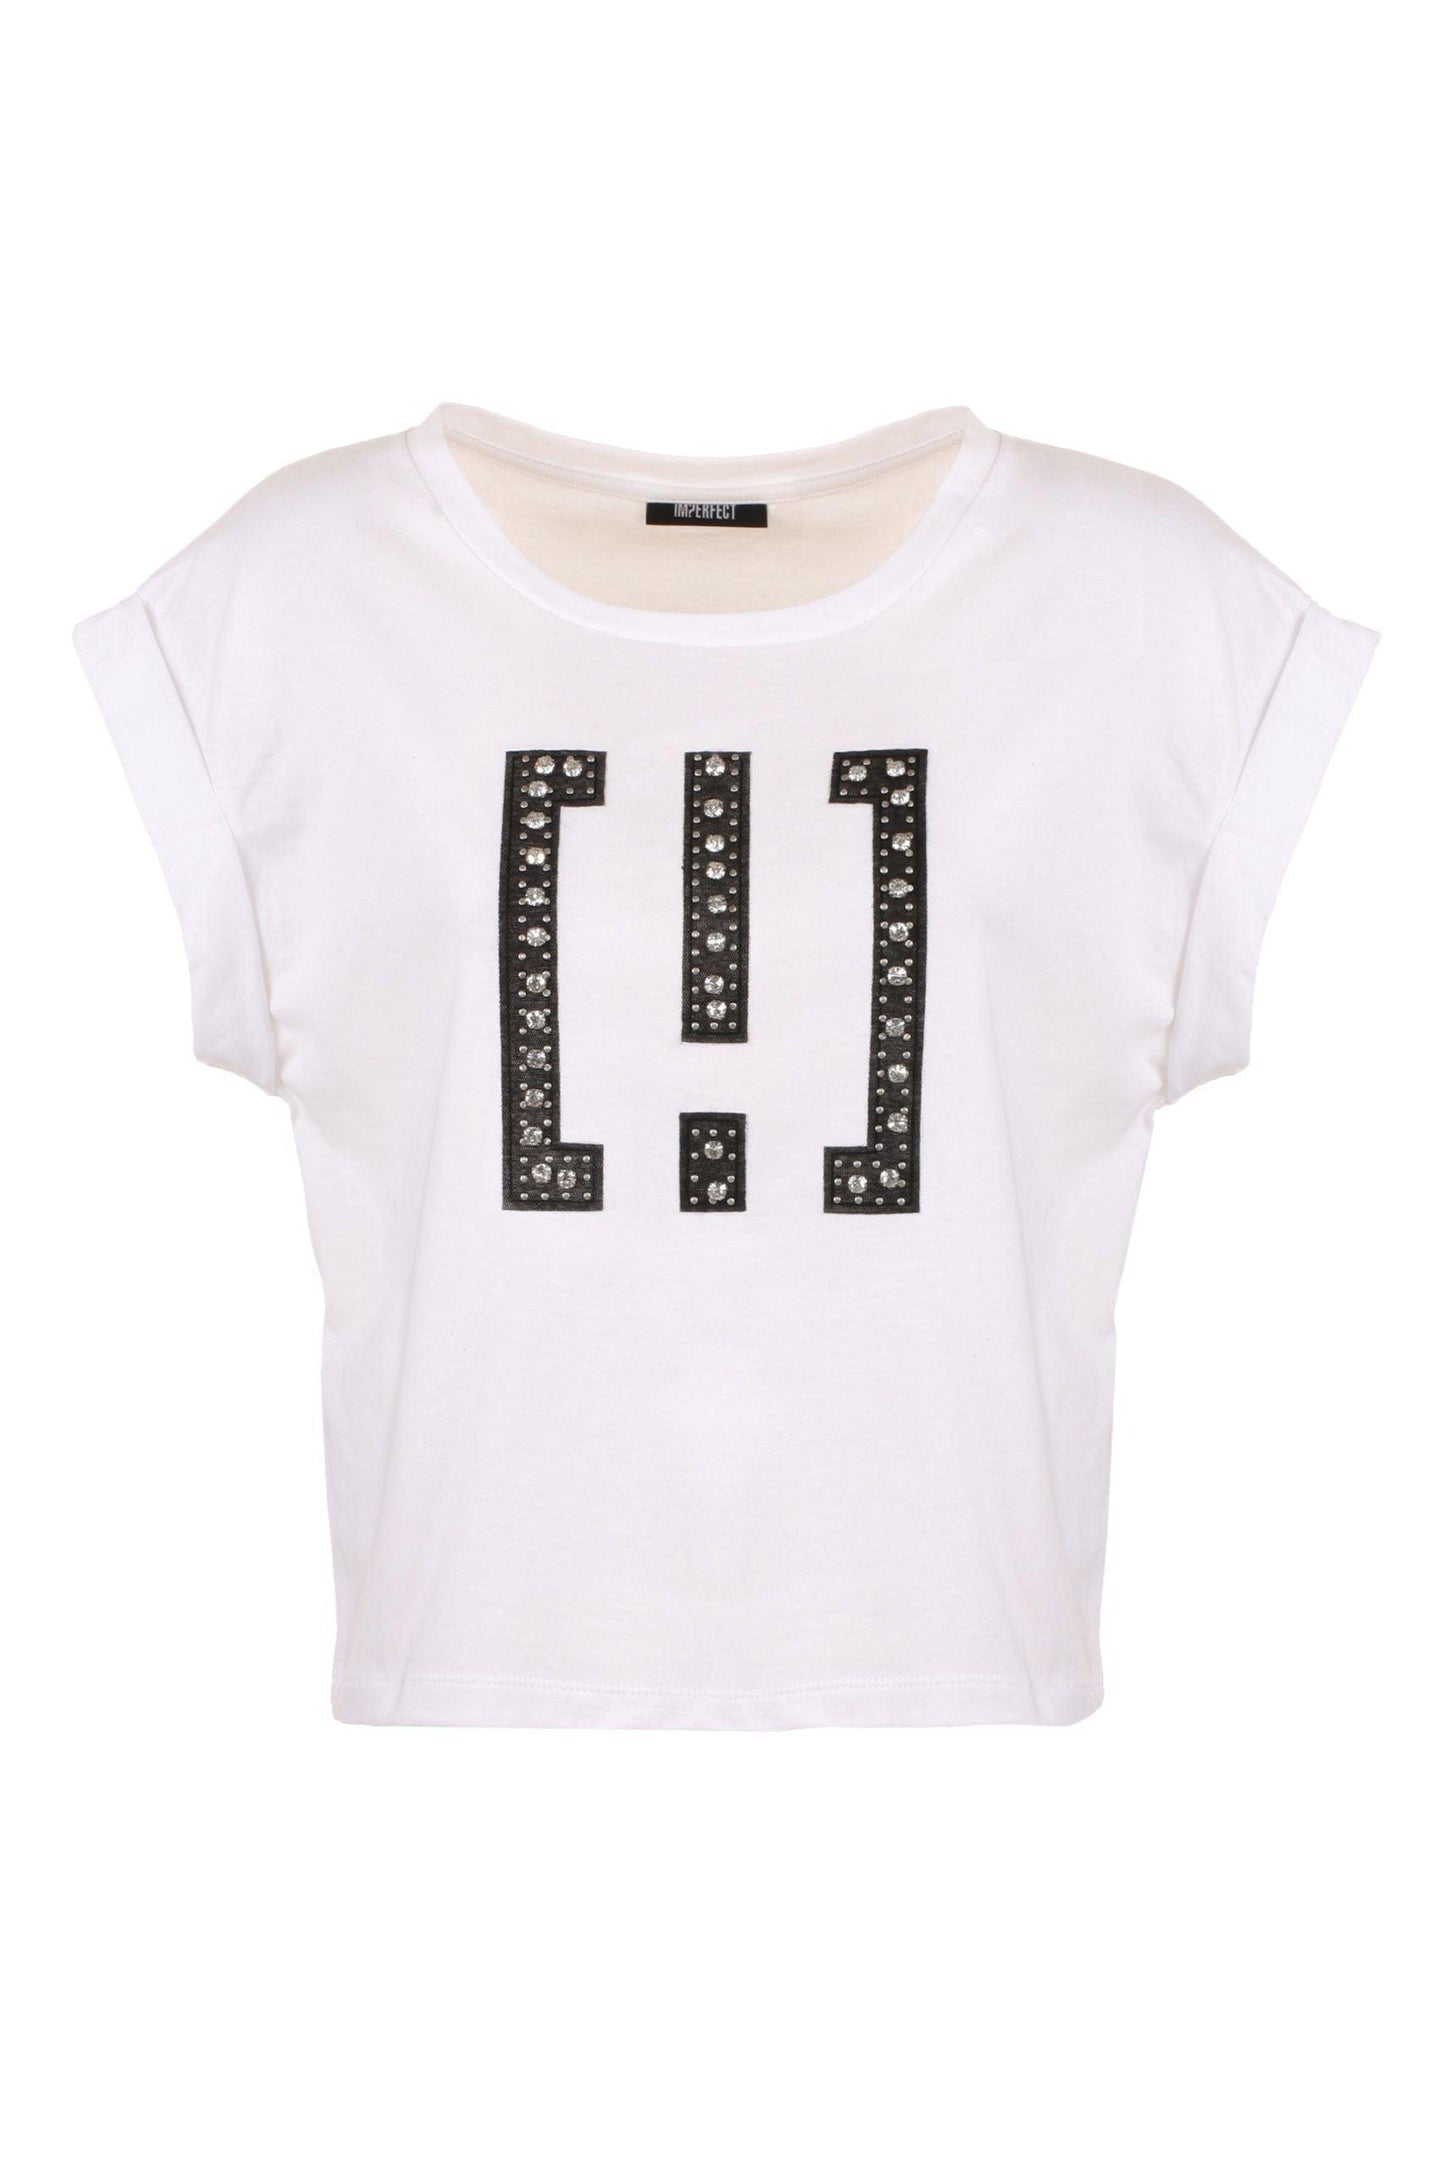 Imperfect Chic White Cotton Tee with Brass Accents - PER.FASHION